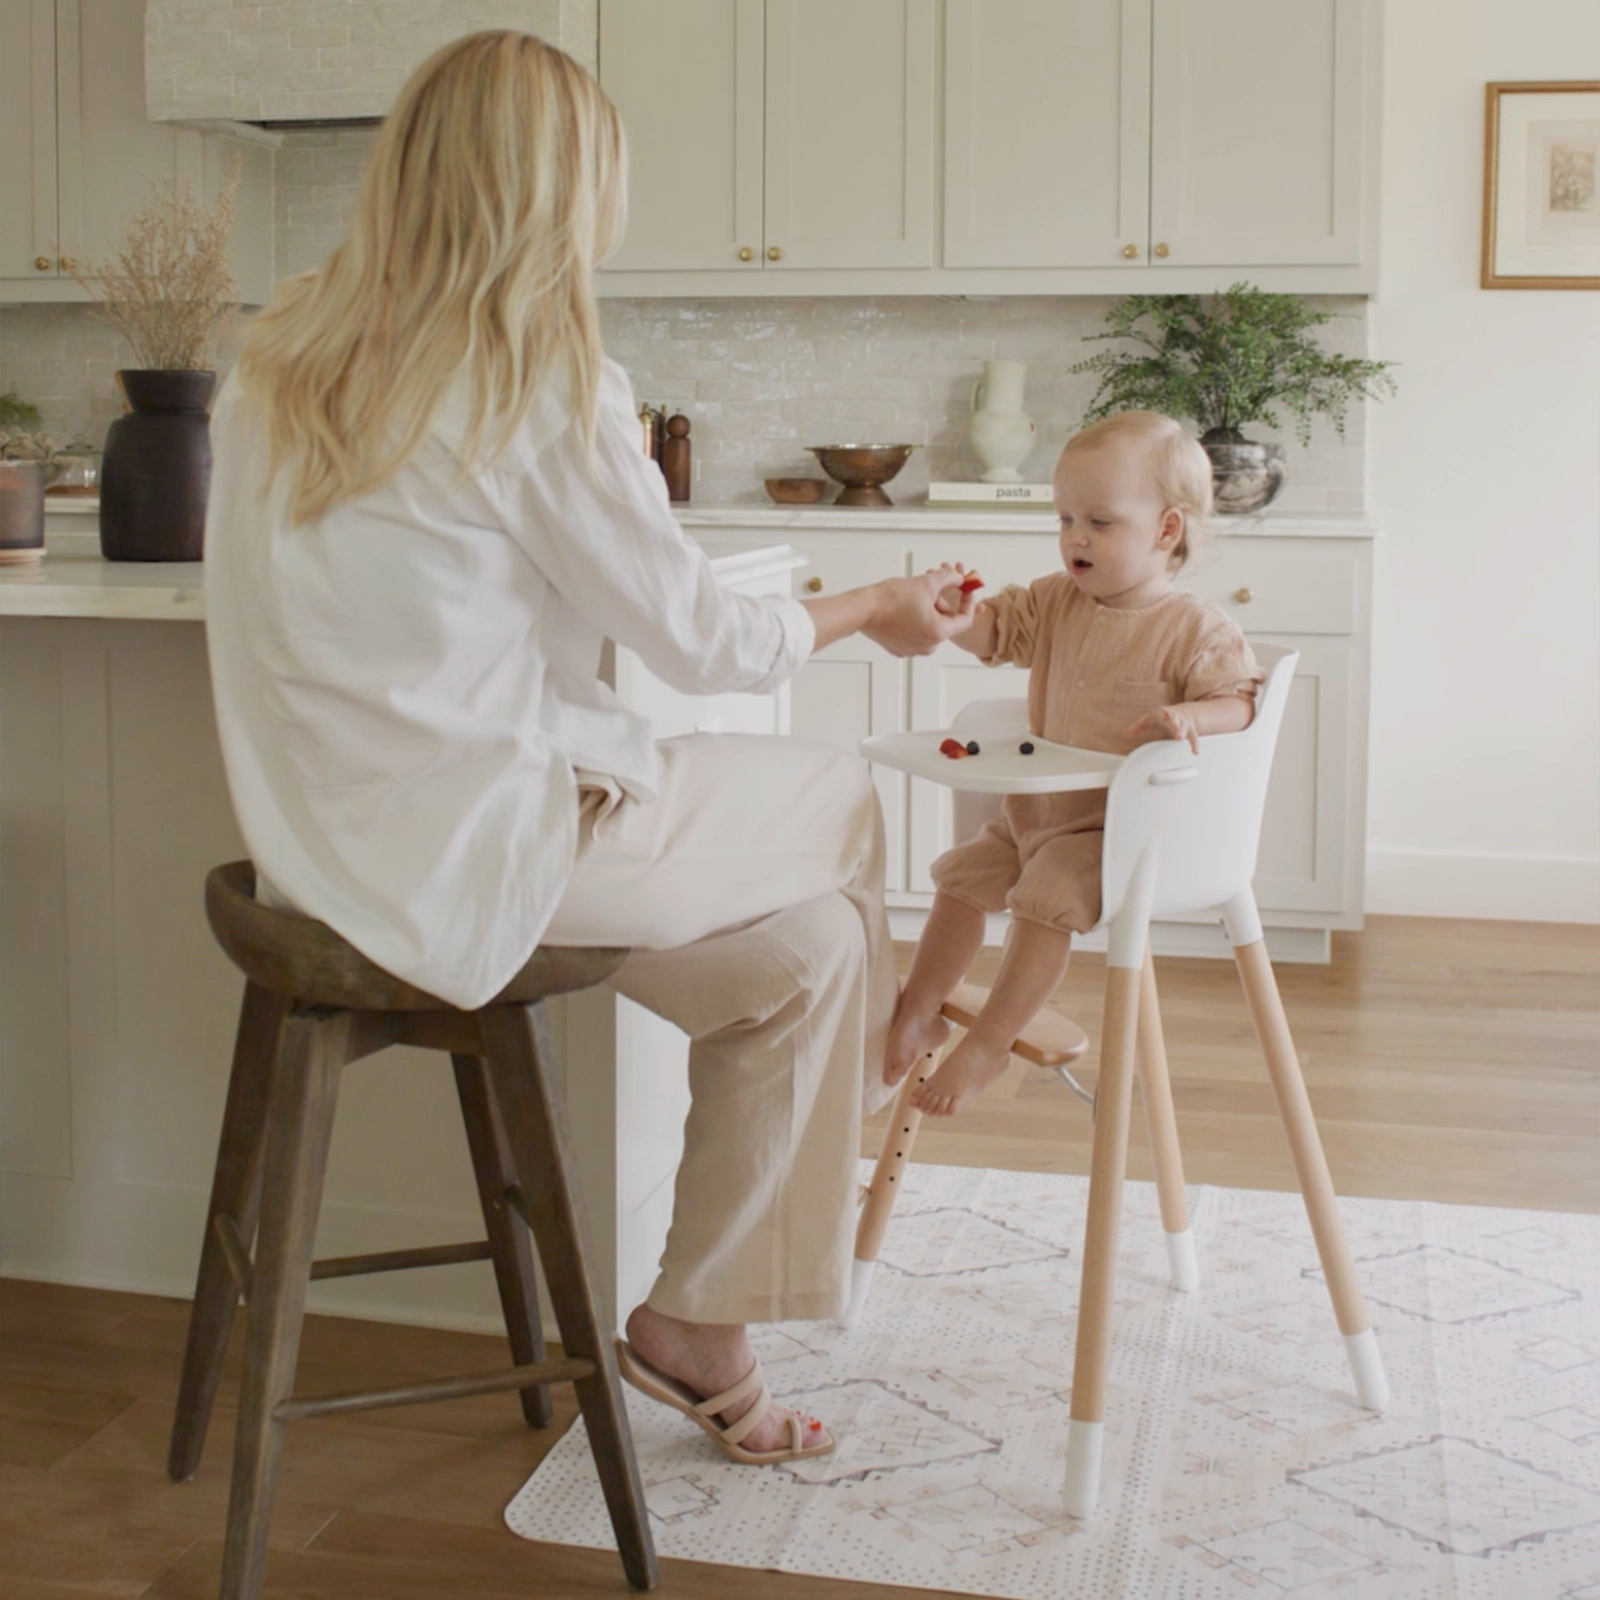 Neutral boho baby highchair mat shown in kitchen with mom feeding baby